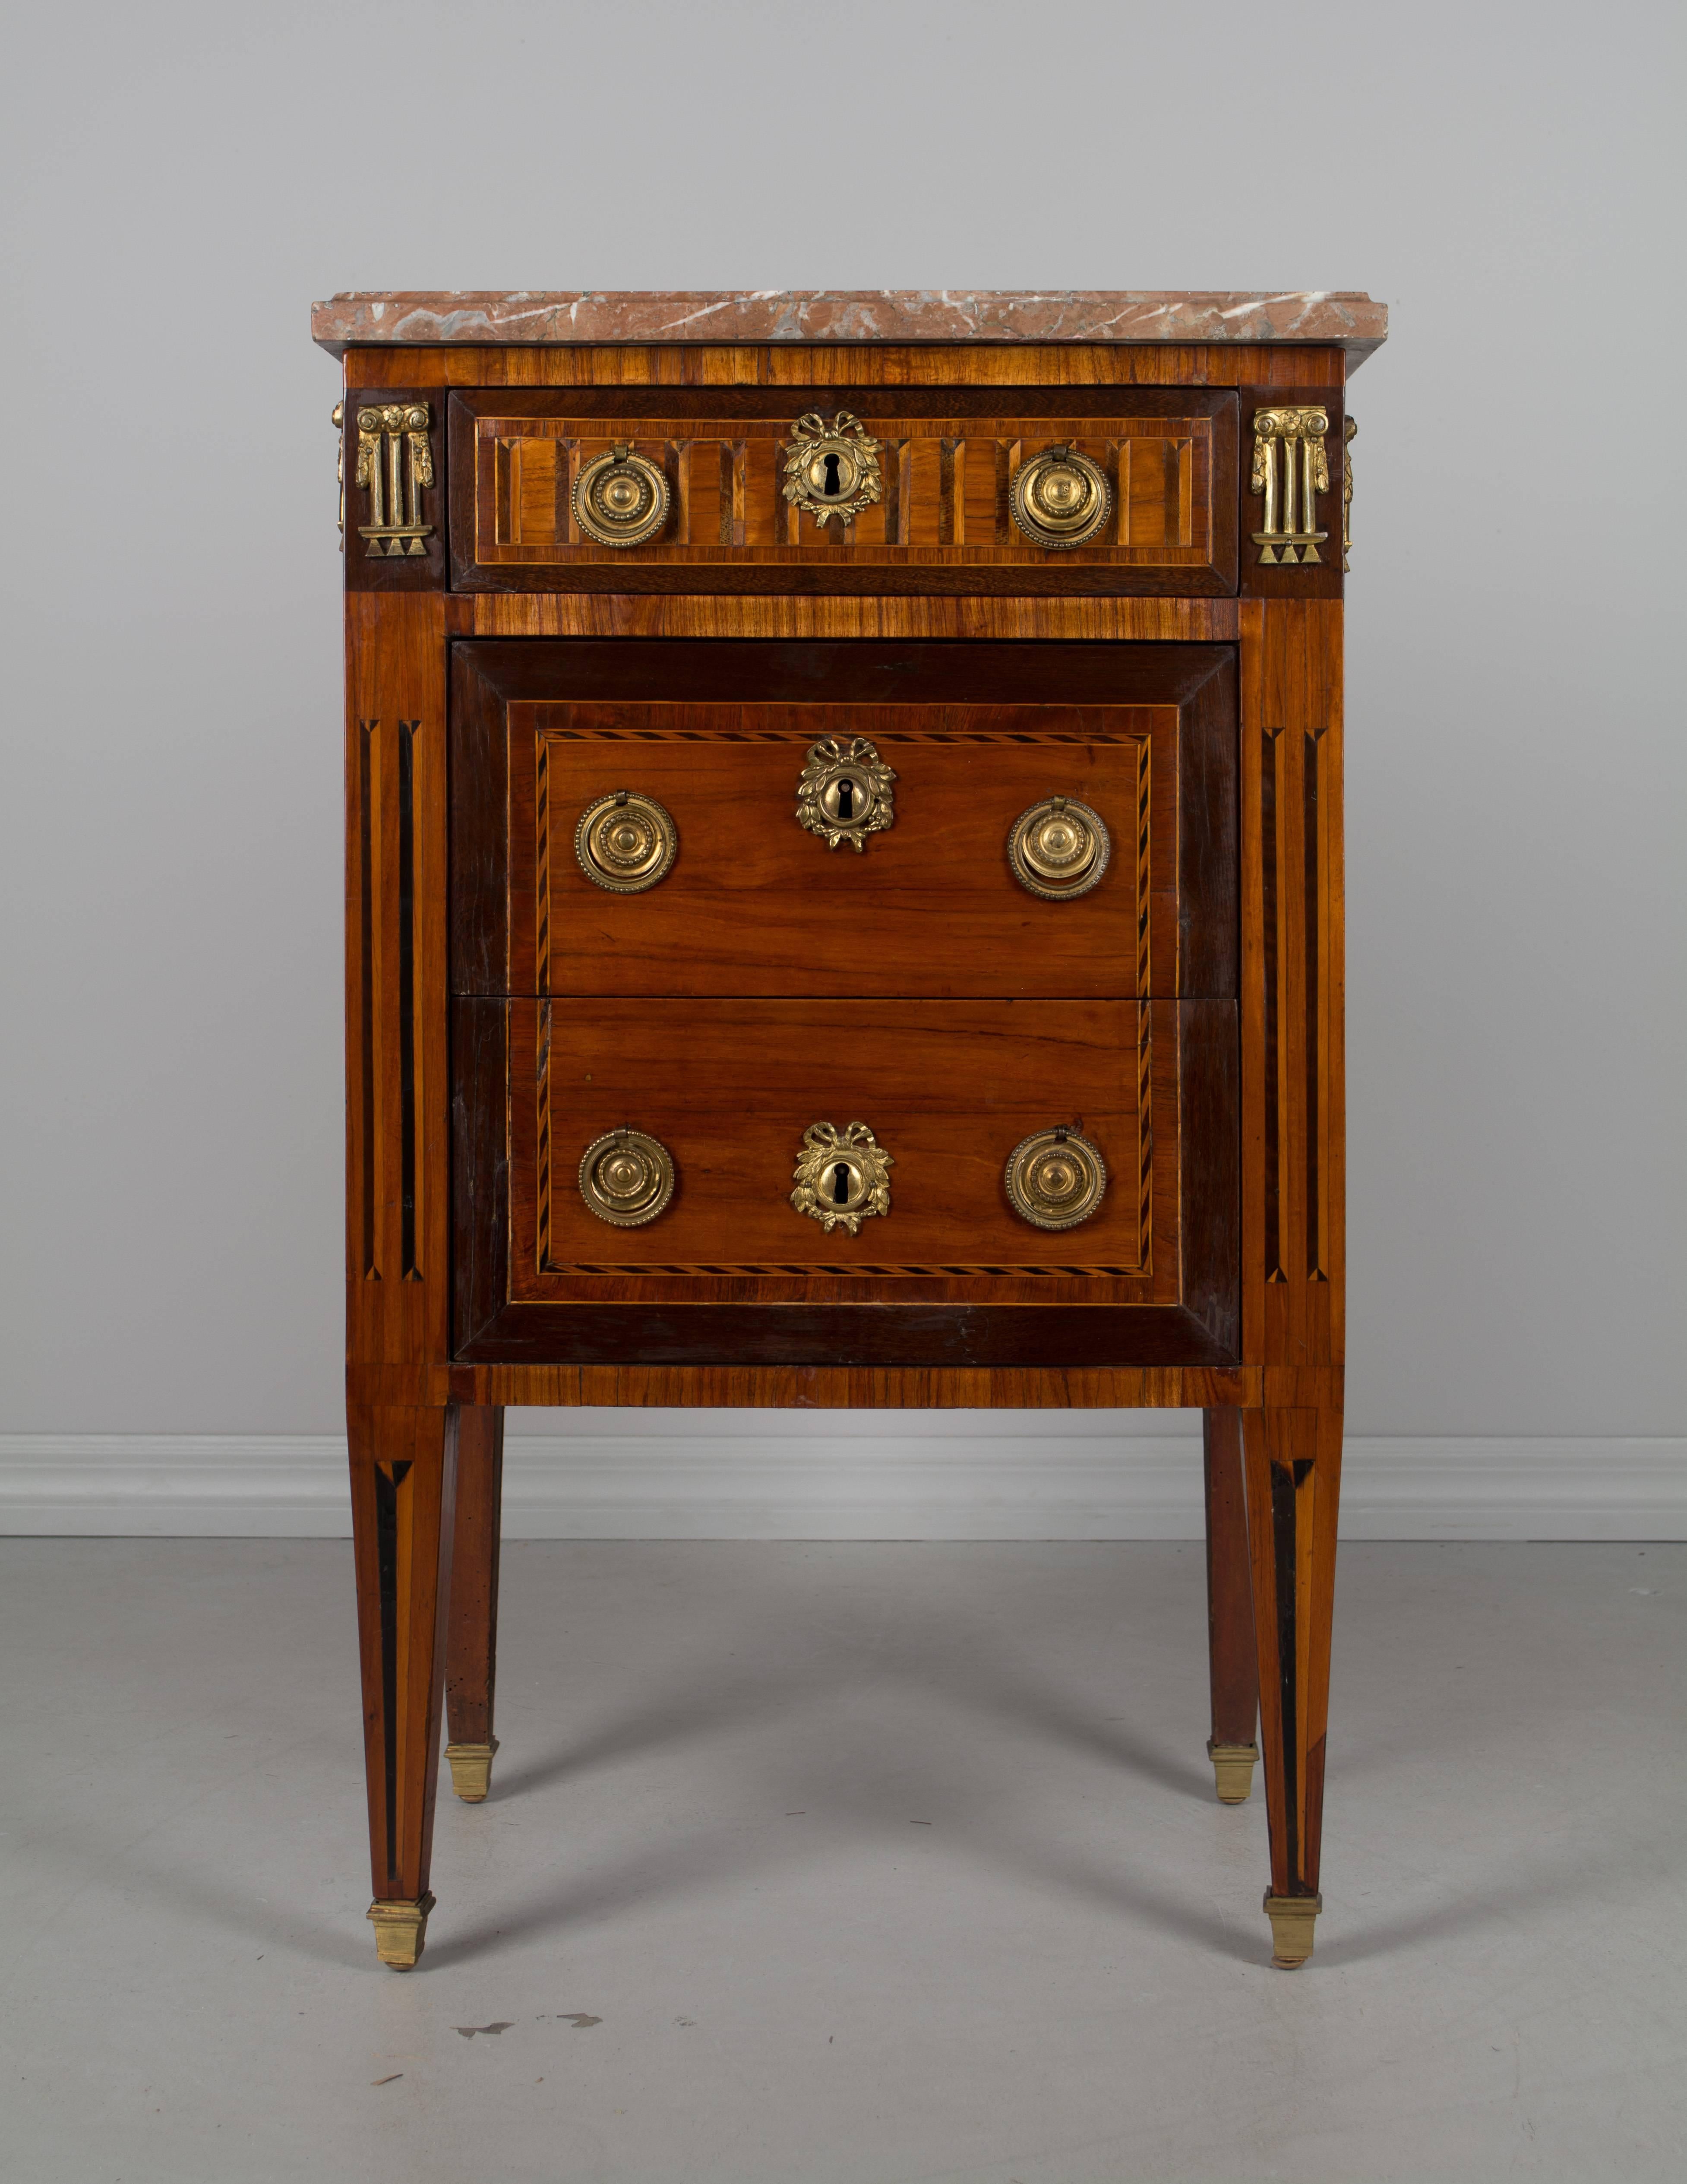 A fine 18th century Louis XVI petite marquetry commode by Parisian ebeniste (cabinet maker), Martin Ohneberg (b. Germany 1738). Beautiful inlay of mahogany, walnut and tulip wood with French polish finish. Oak as a secondary wood. Three dovetailed